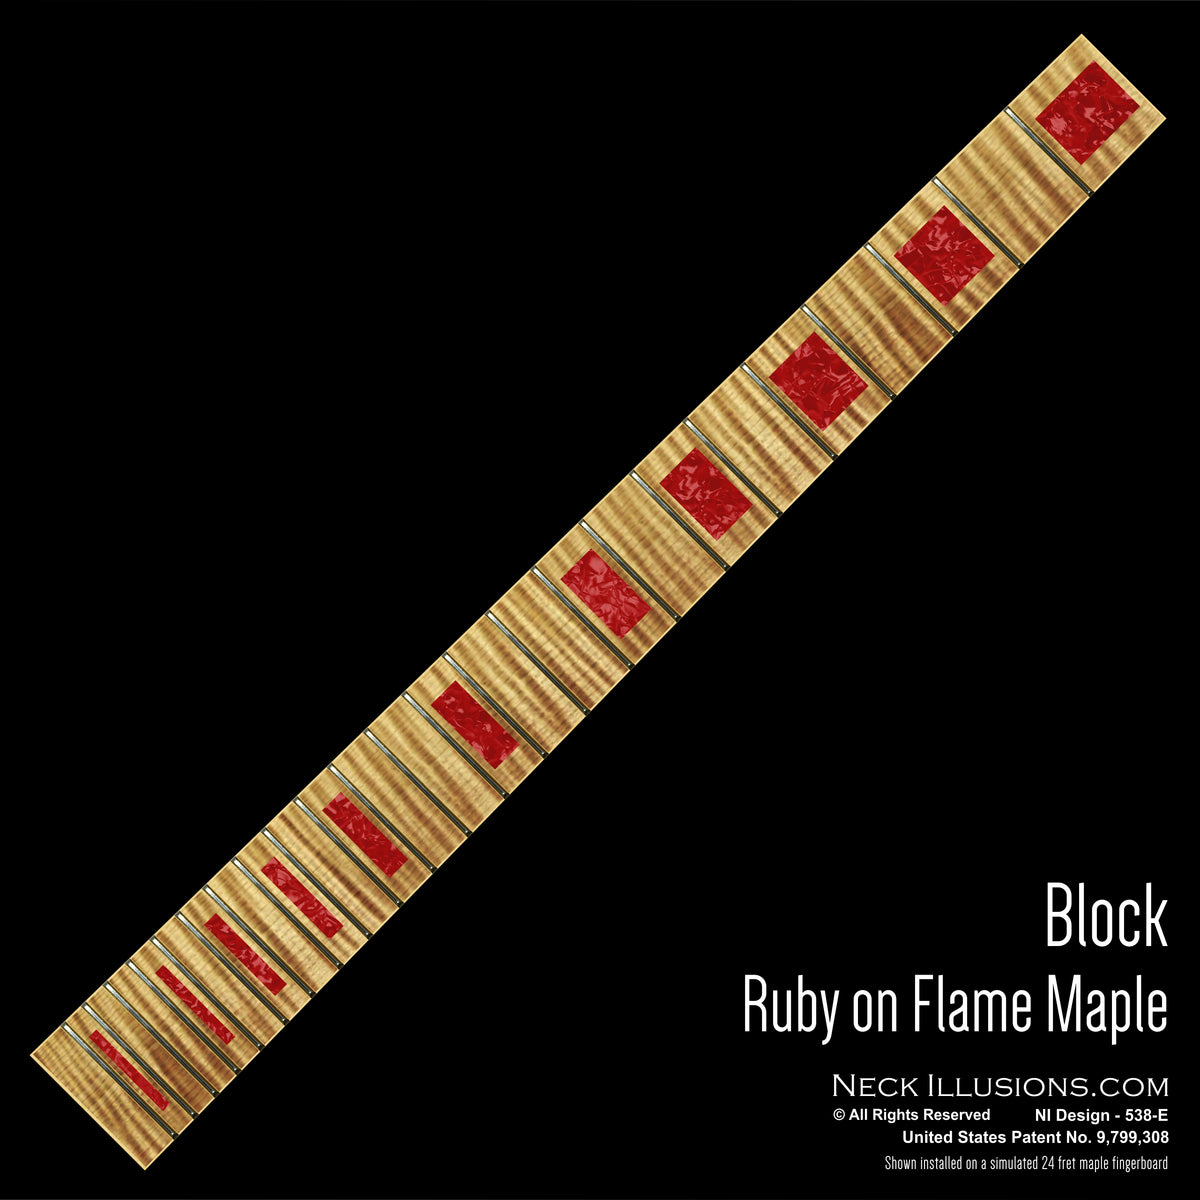 Block on Flame Maple